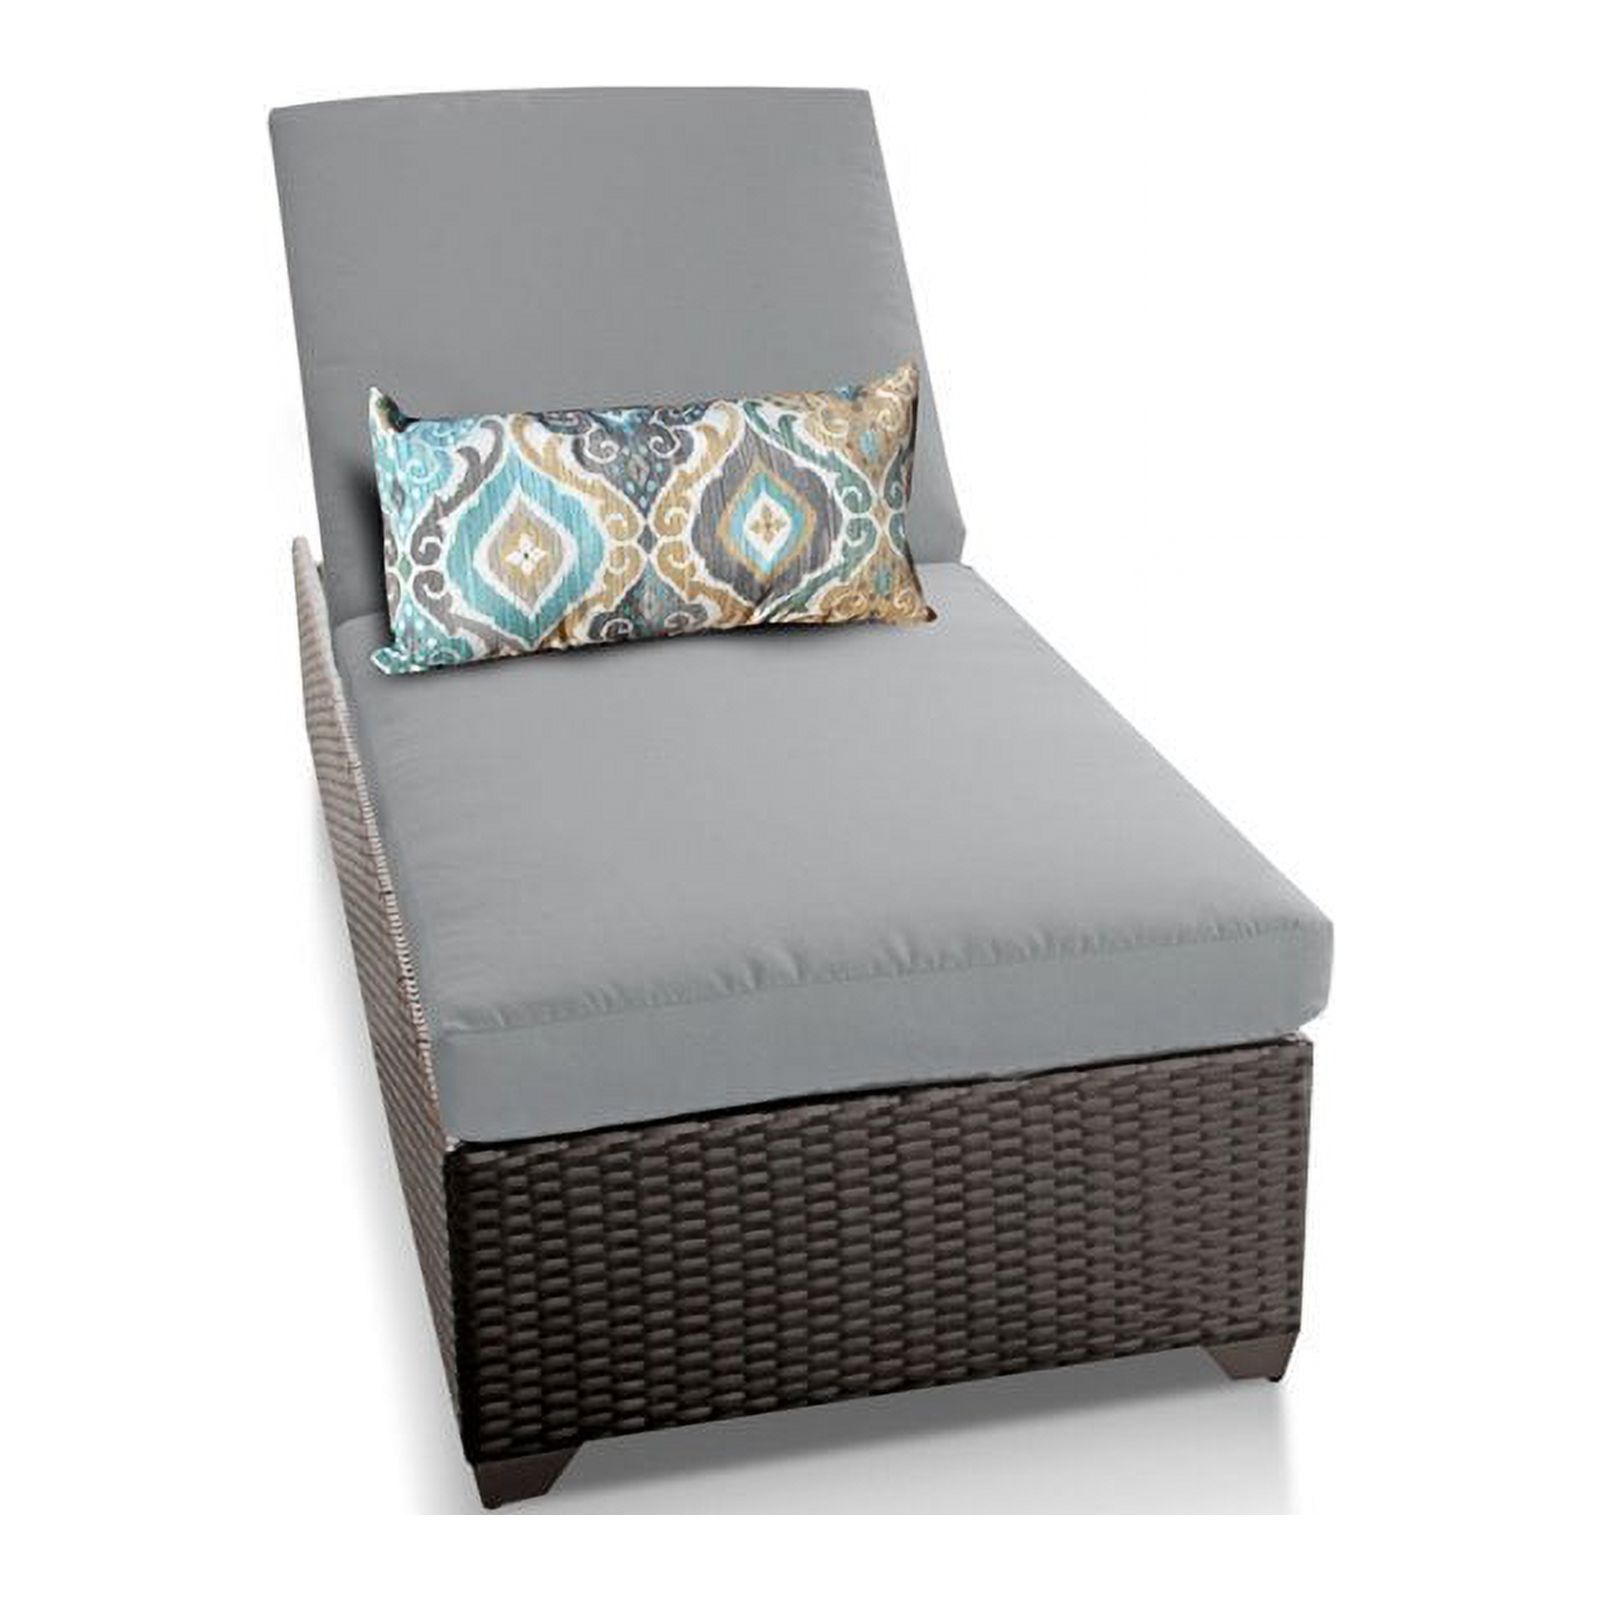 Bowery Hill Wicker/Fabric Patio Chaise Lounge in Gray/Espresso - image 2 of 2